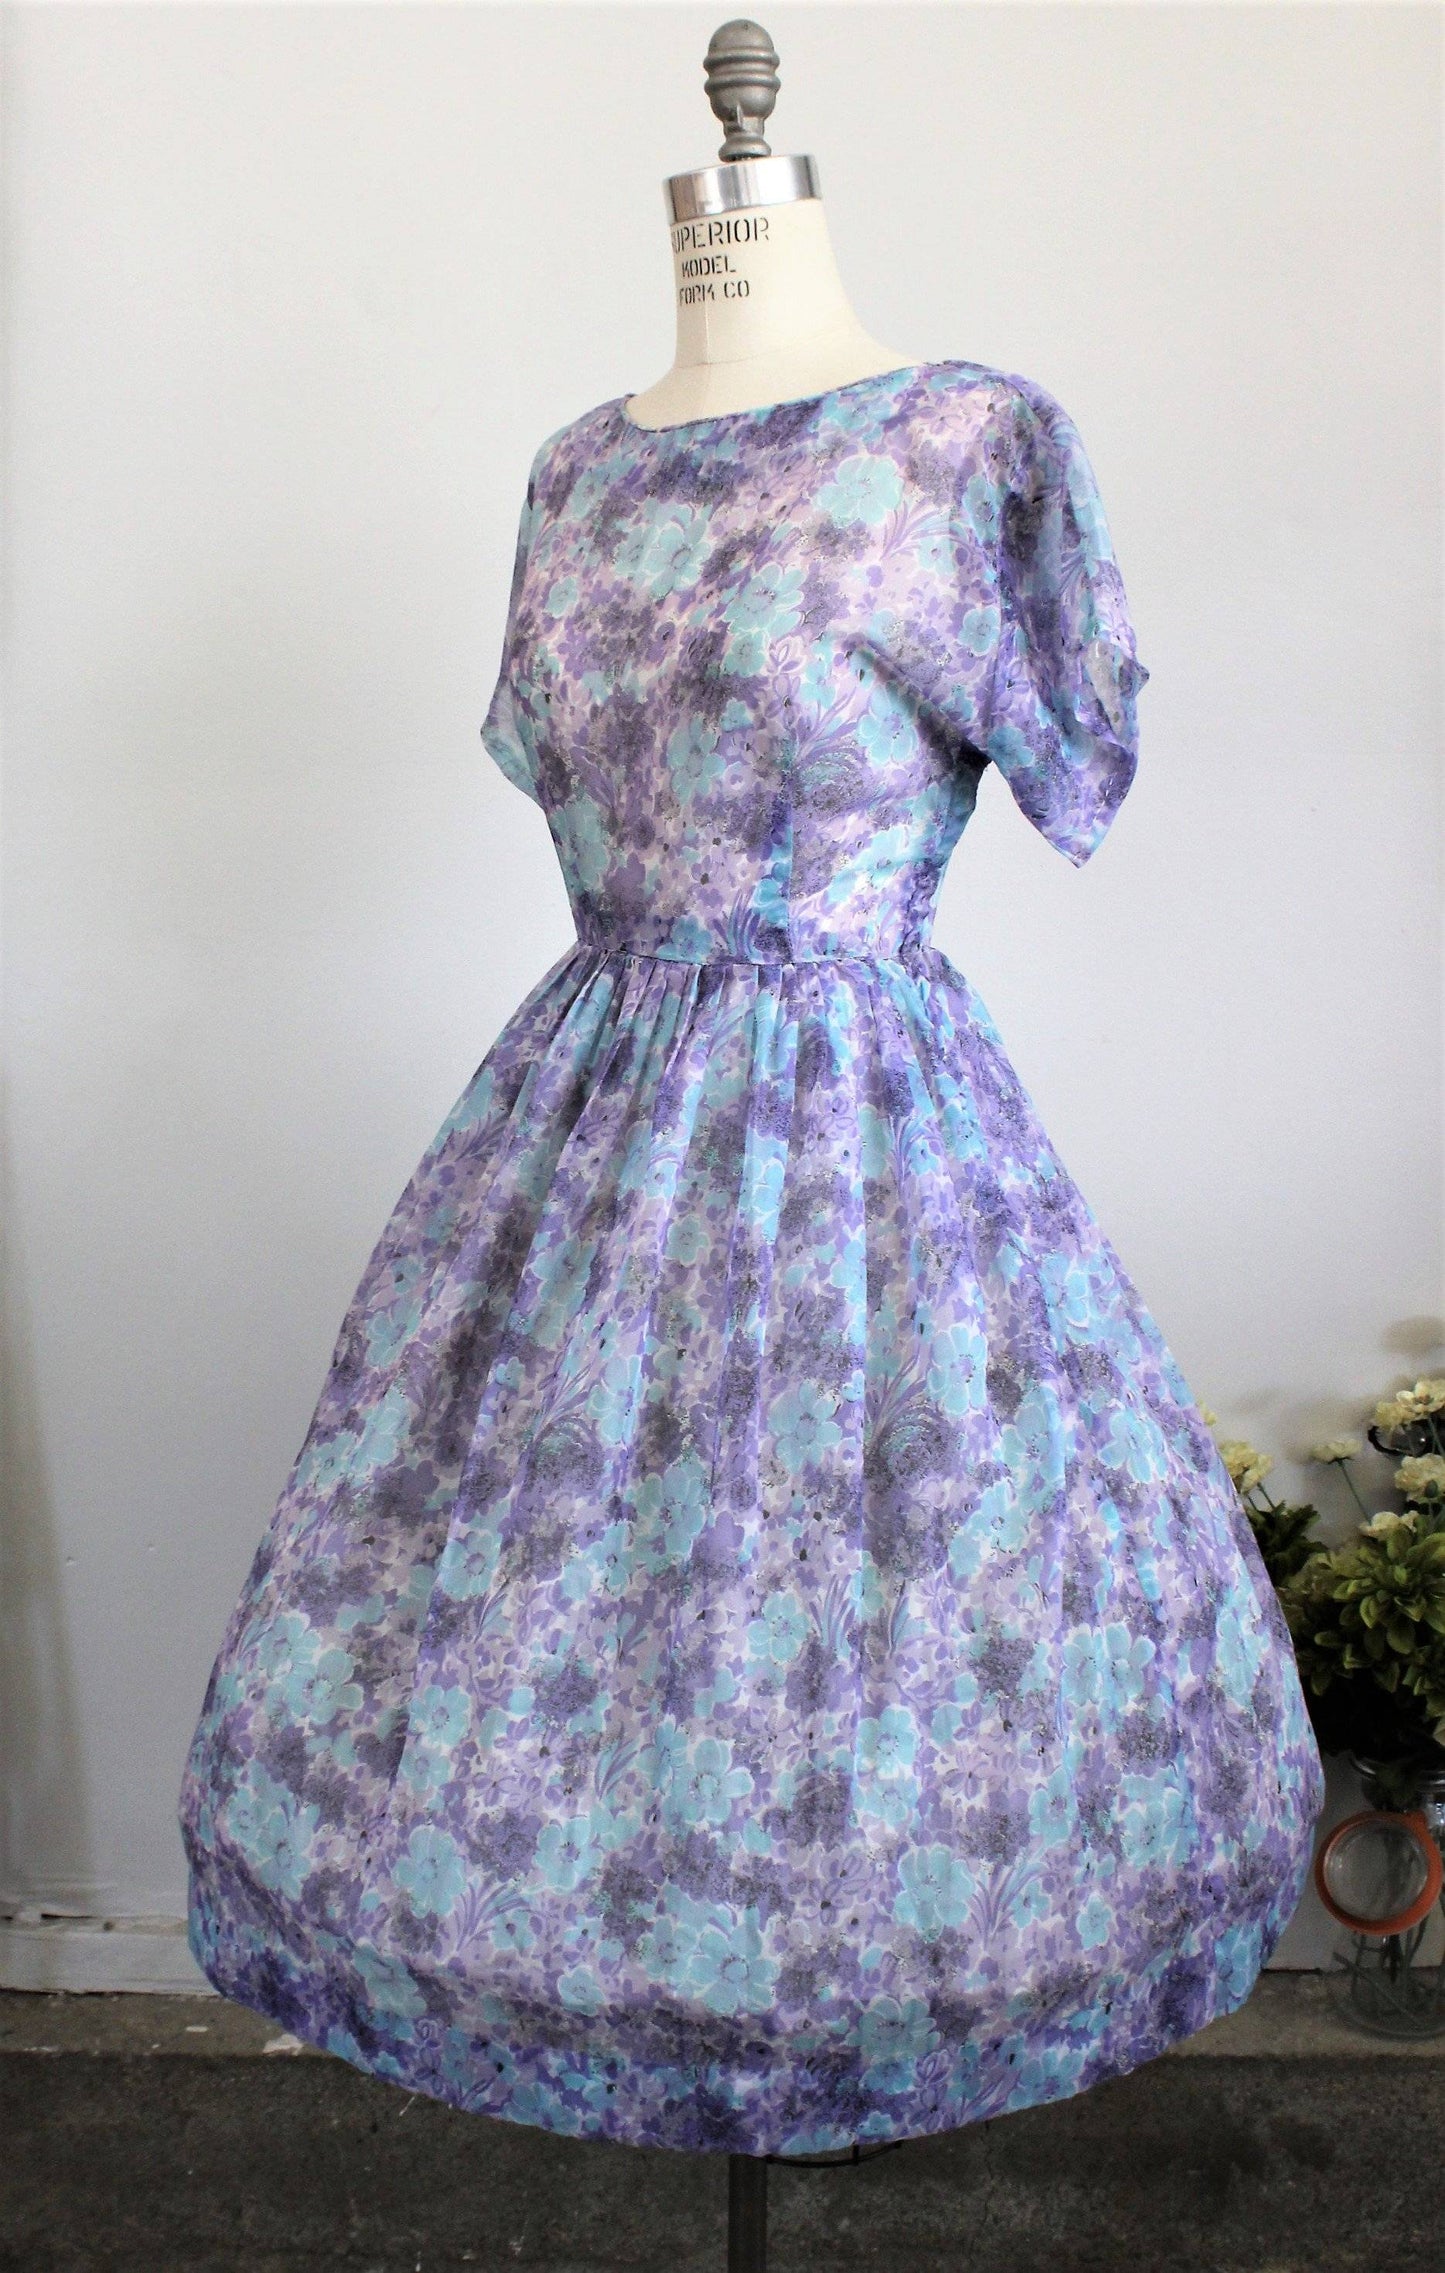 Vintage 1950s Blue and Purple Floral Print New Look Dress, Sheer Nylon-Toadstool Farm Vintage-1940s Dress,40s Clothing,40s Day Dress,40s Dress,Fit and Flare Dress,Floral Print,Full Circle Skirt,Metal Zipper,New Look Dress,Spring Dress,Summer Dress,Vintage,Vintage Clothing,Vintage Dress,Vintage Dresses